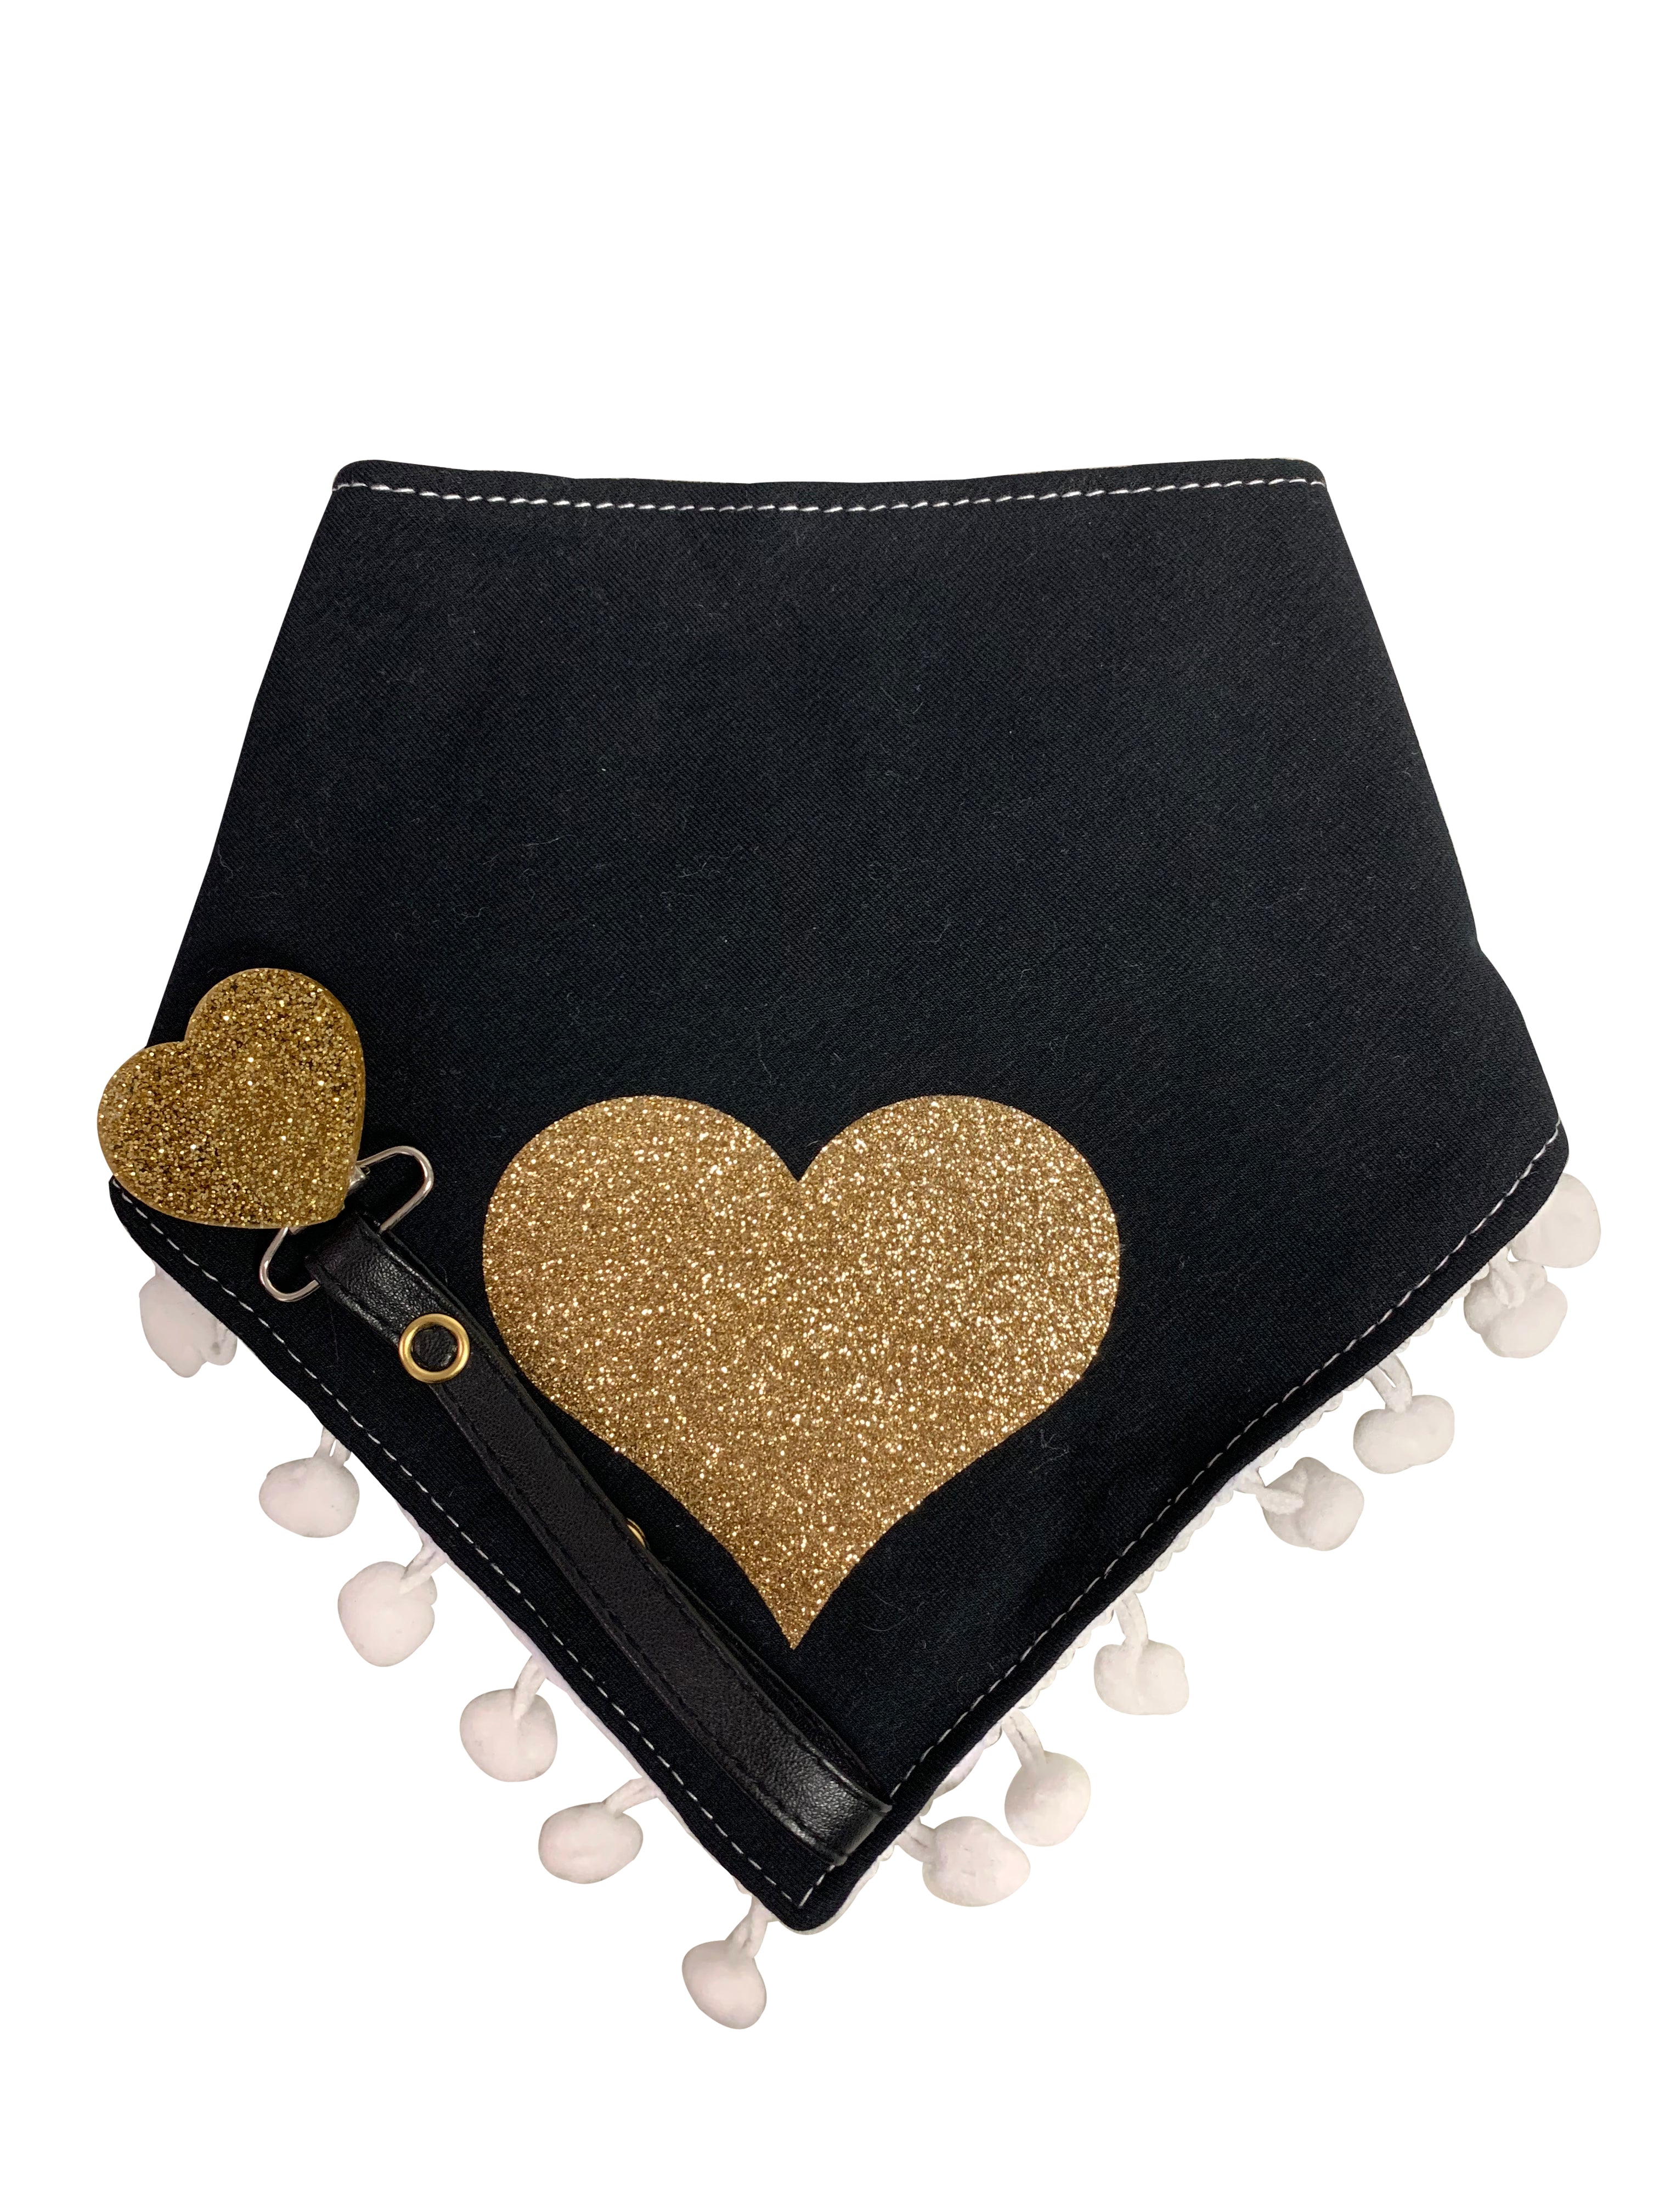 Black with Gold sparkle heart bib, hat, pacifier clip DELUXE GIFT SET